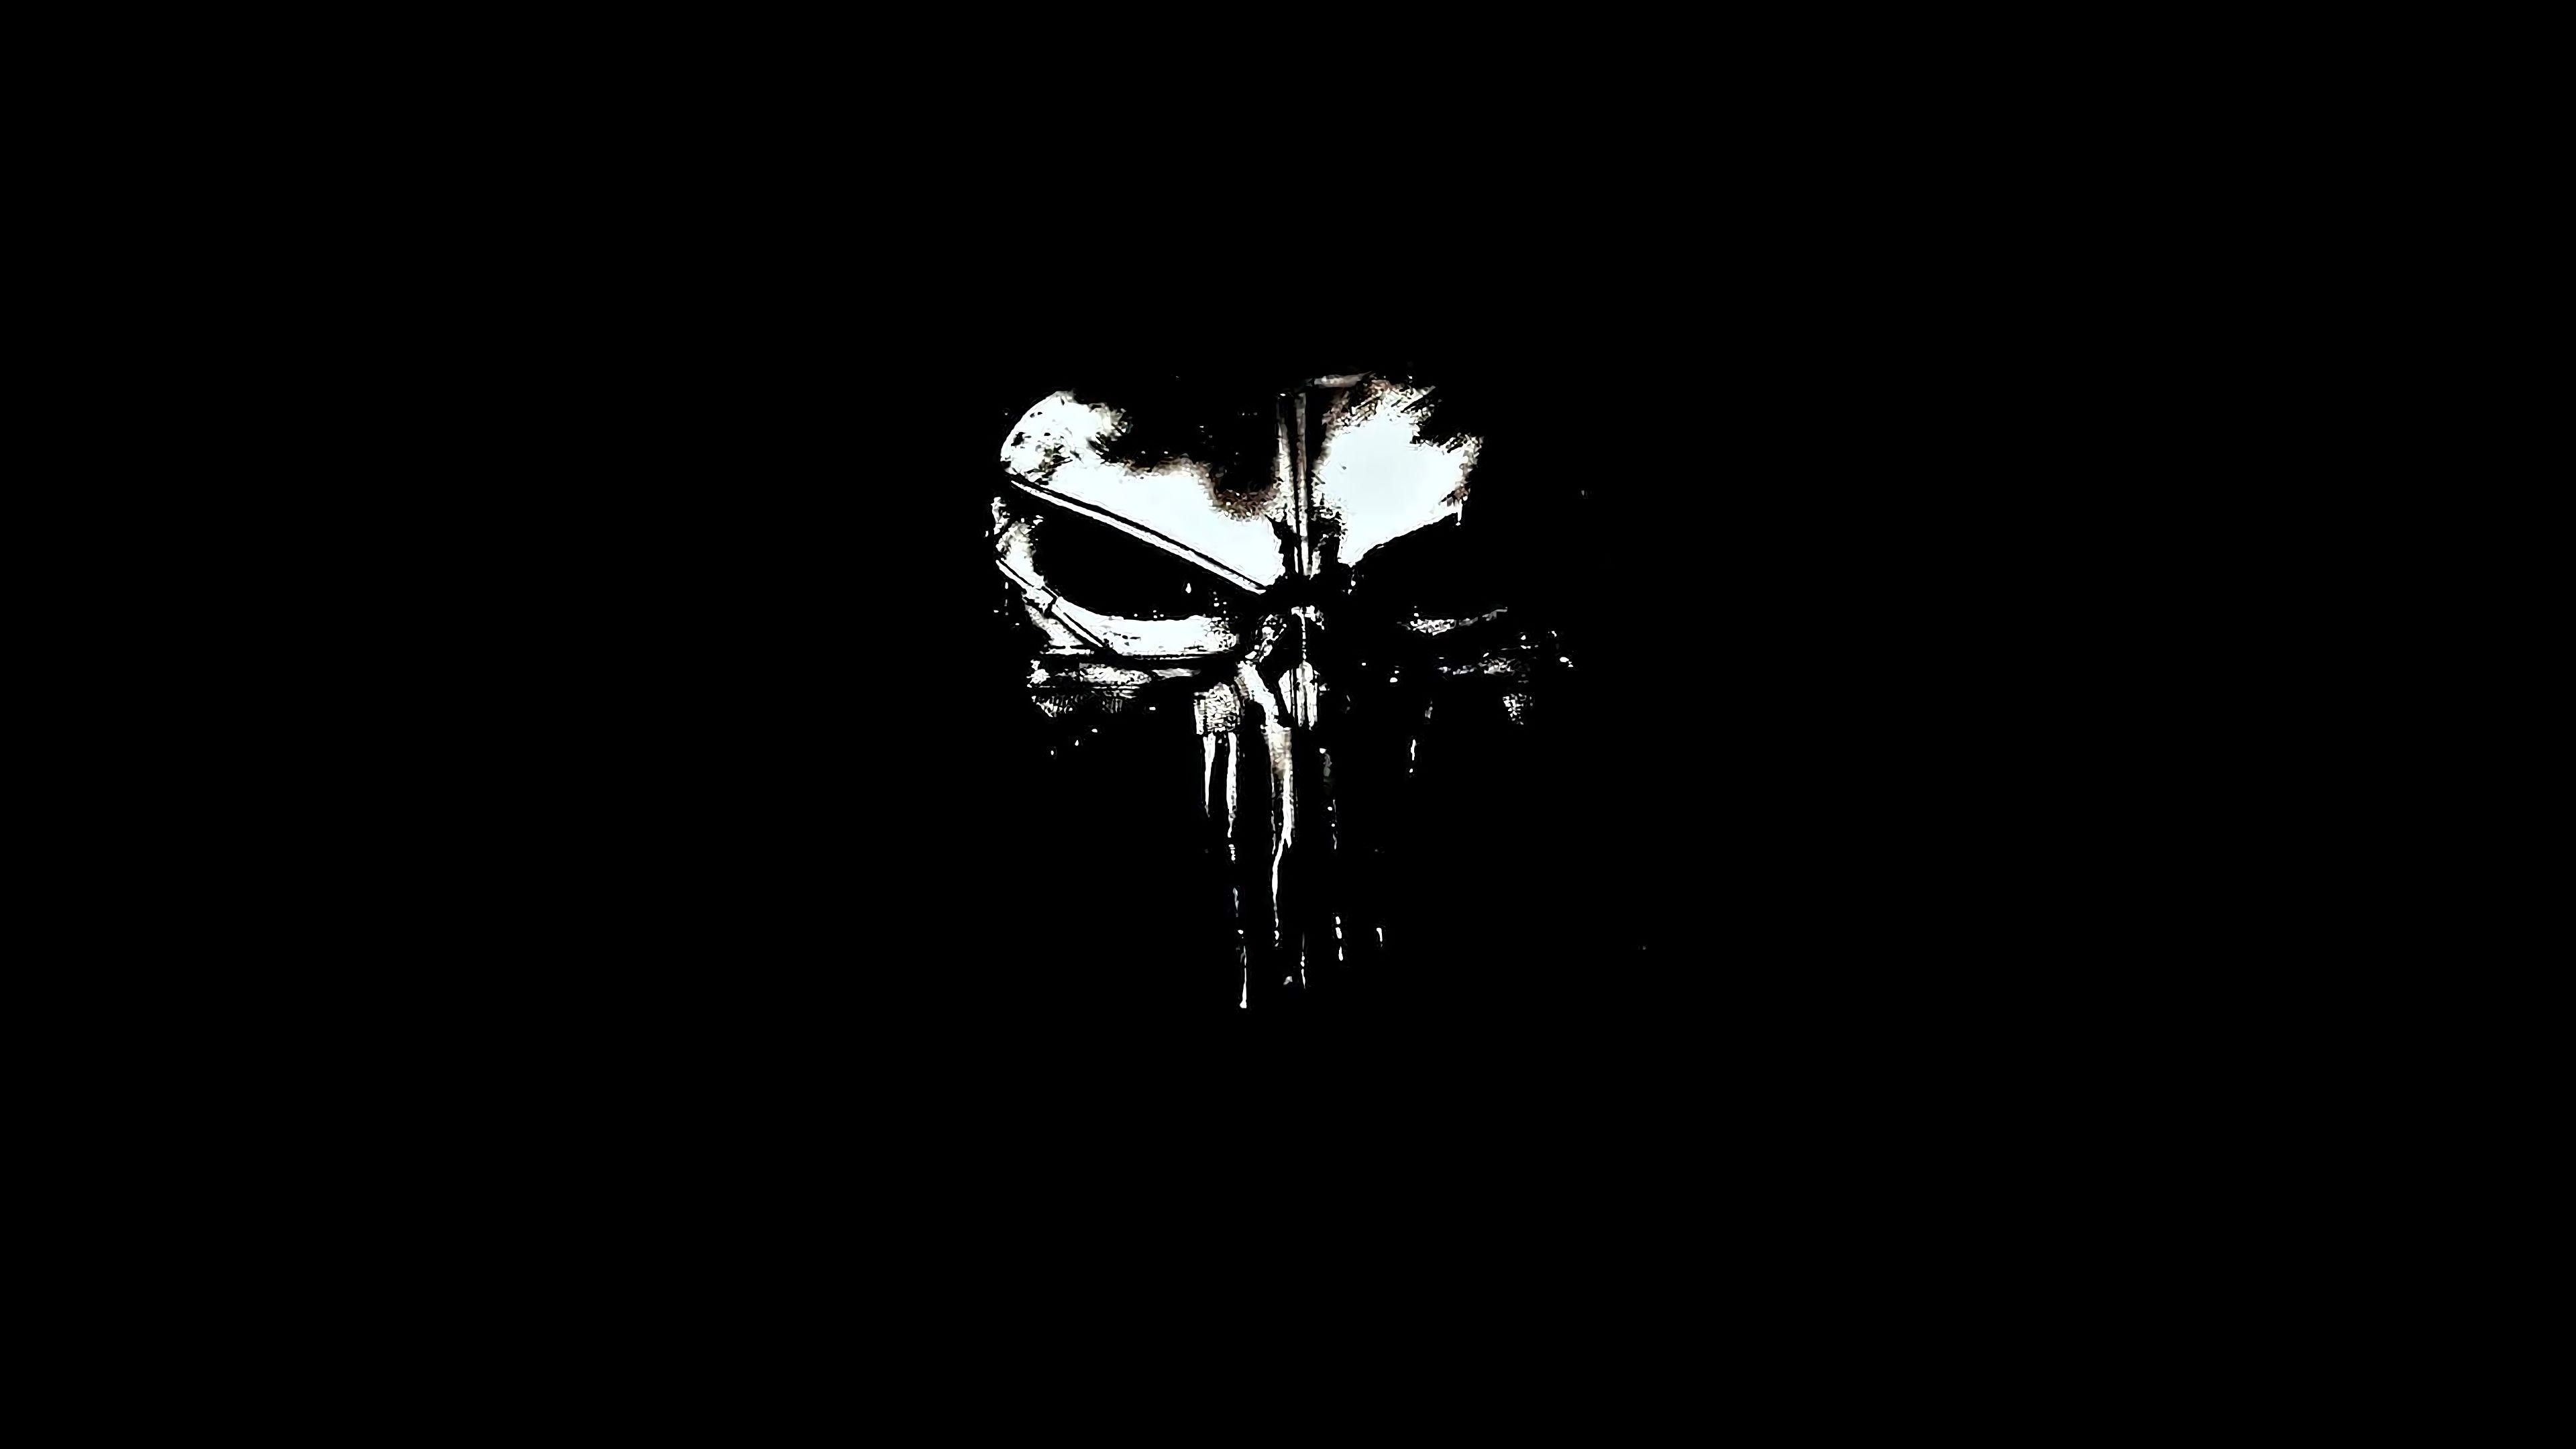 The Punisher [TV Series]